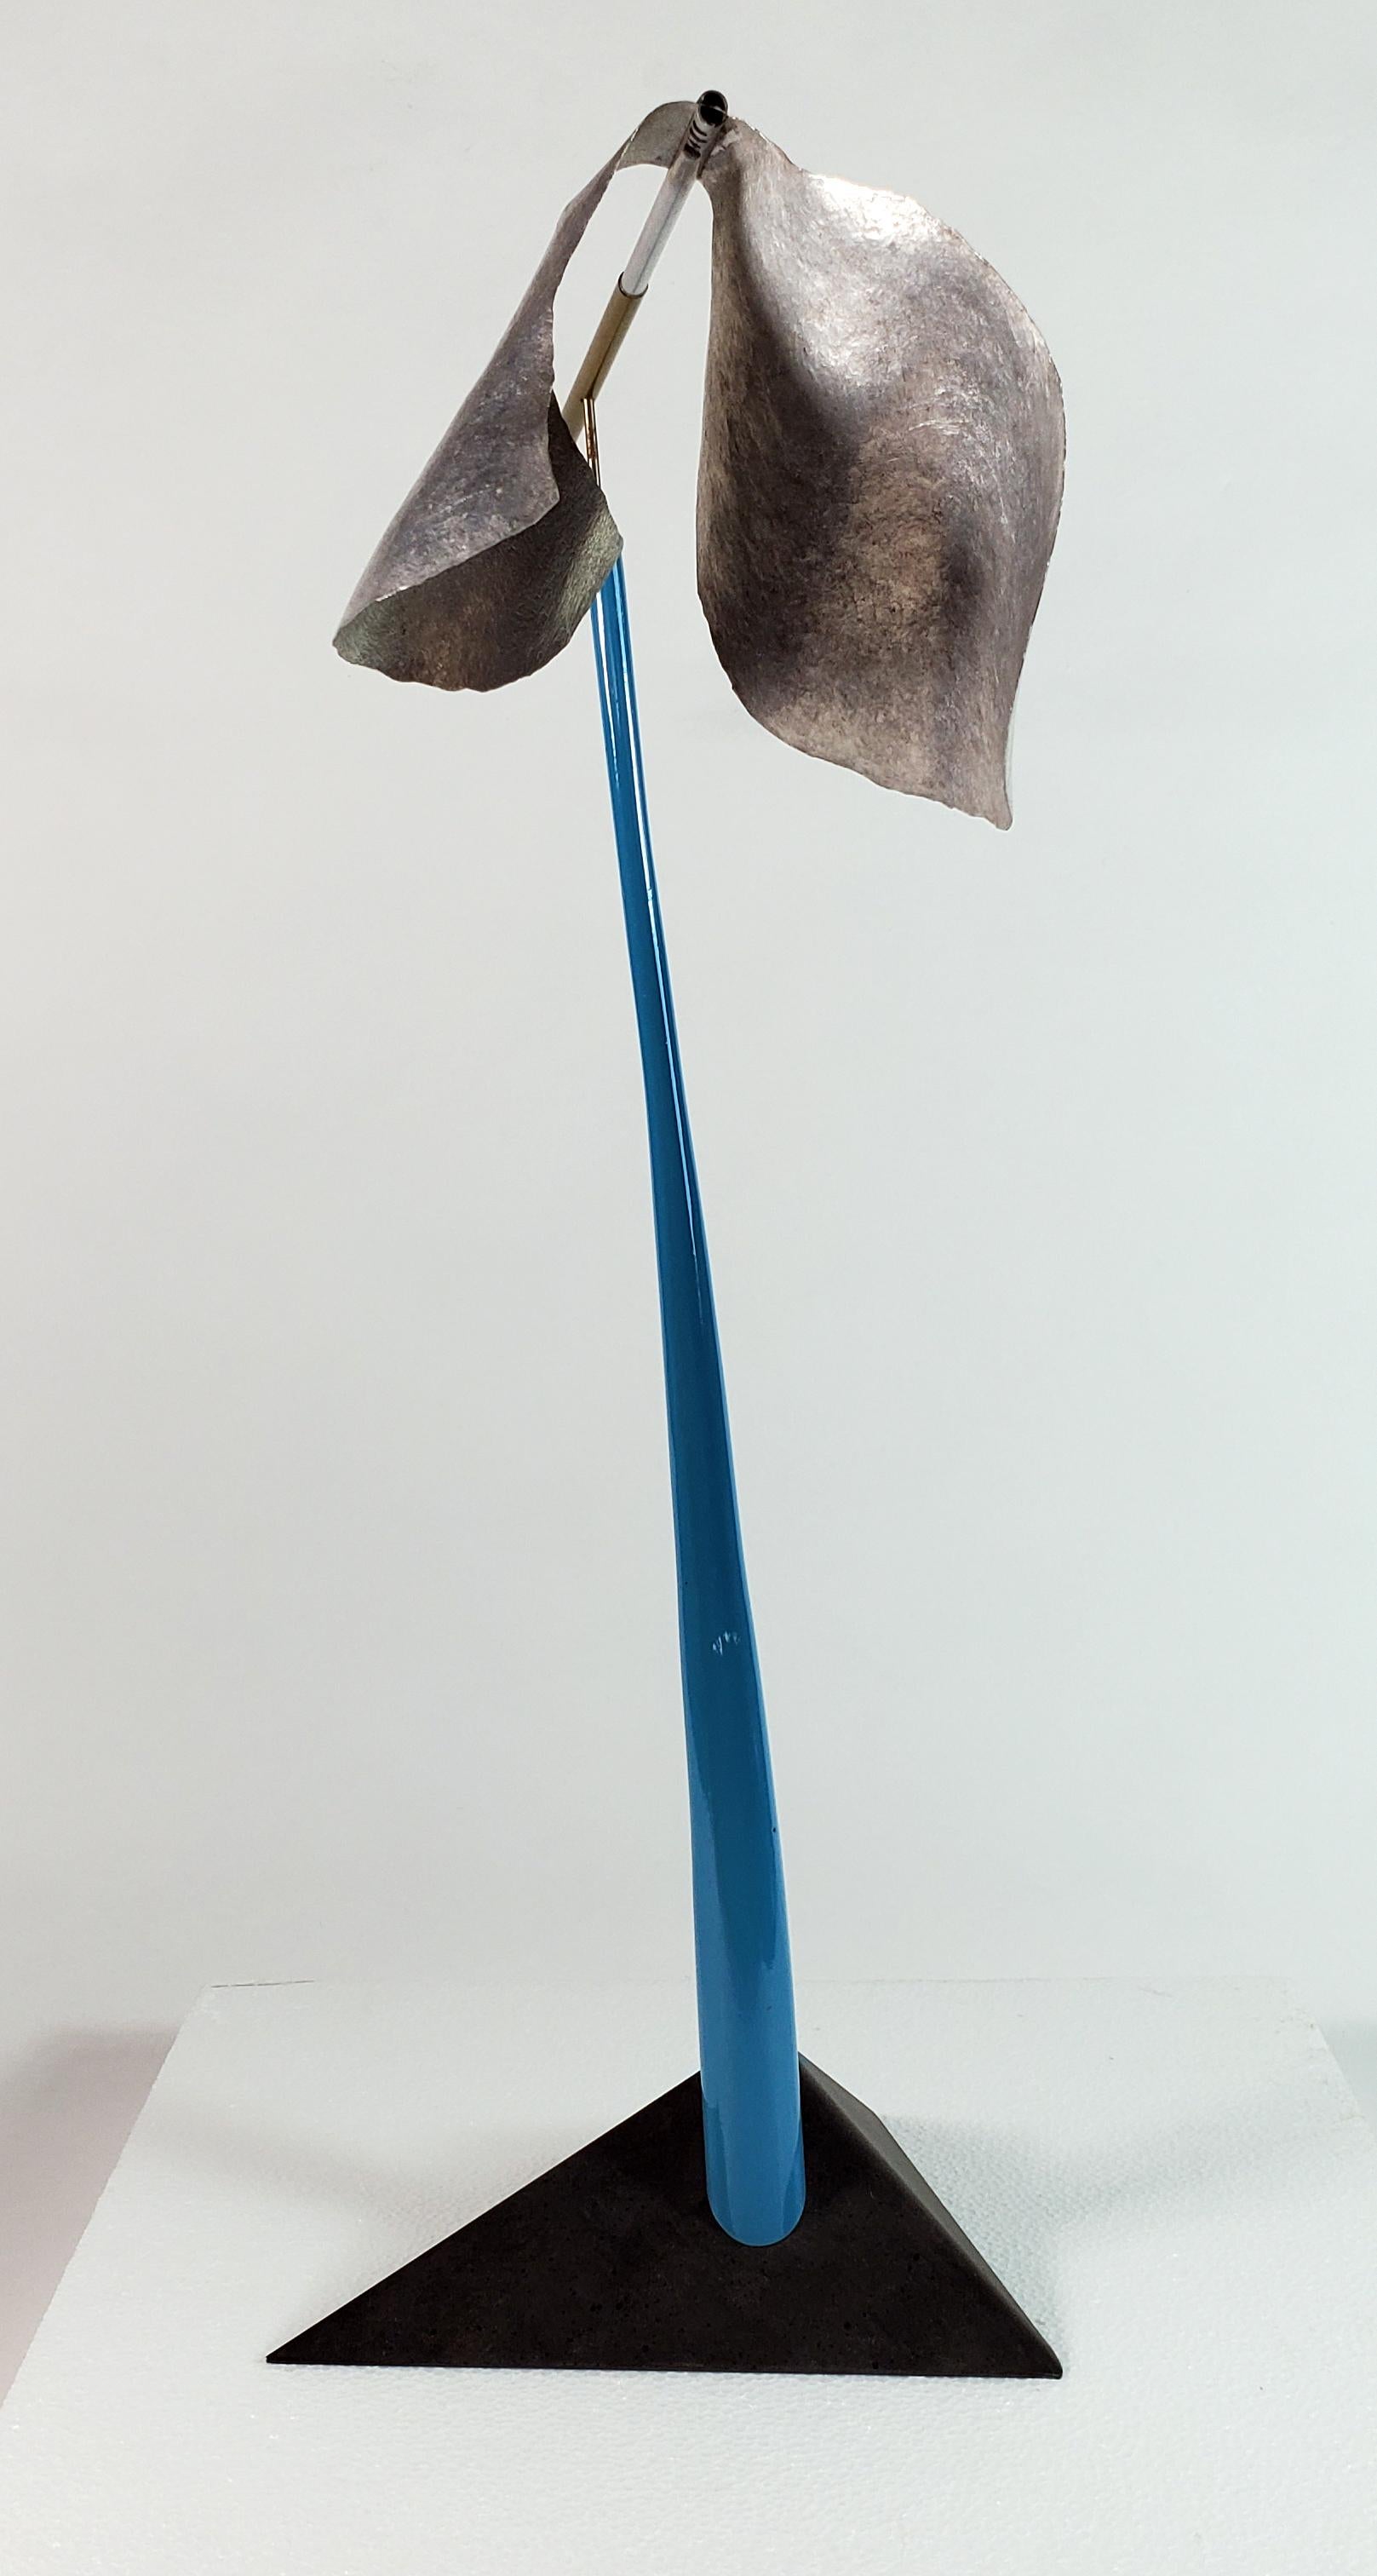 Cloud Constructions
This elegant and playful sculpture is kinetic (characterized by movement). The painted steel, vertical, sky-blue stalk creates the fulcrum or support for the horizontal element. The motion of the “weathervane” is created by the